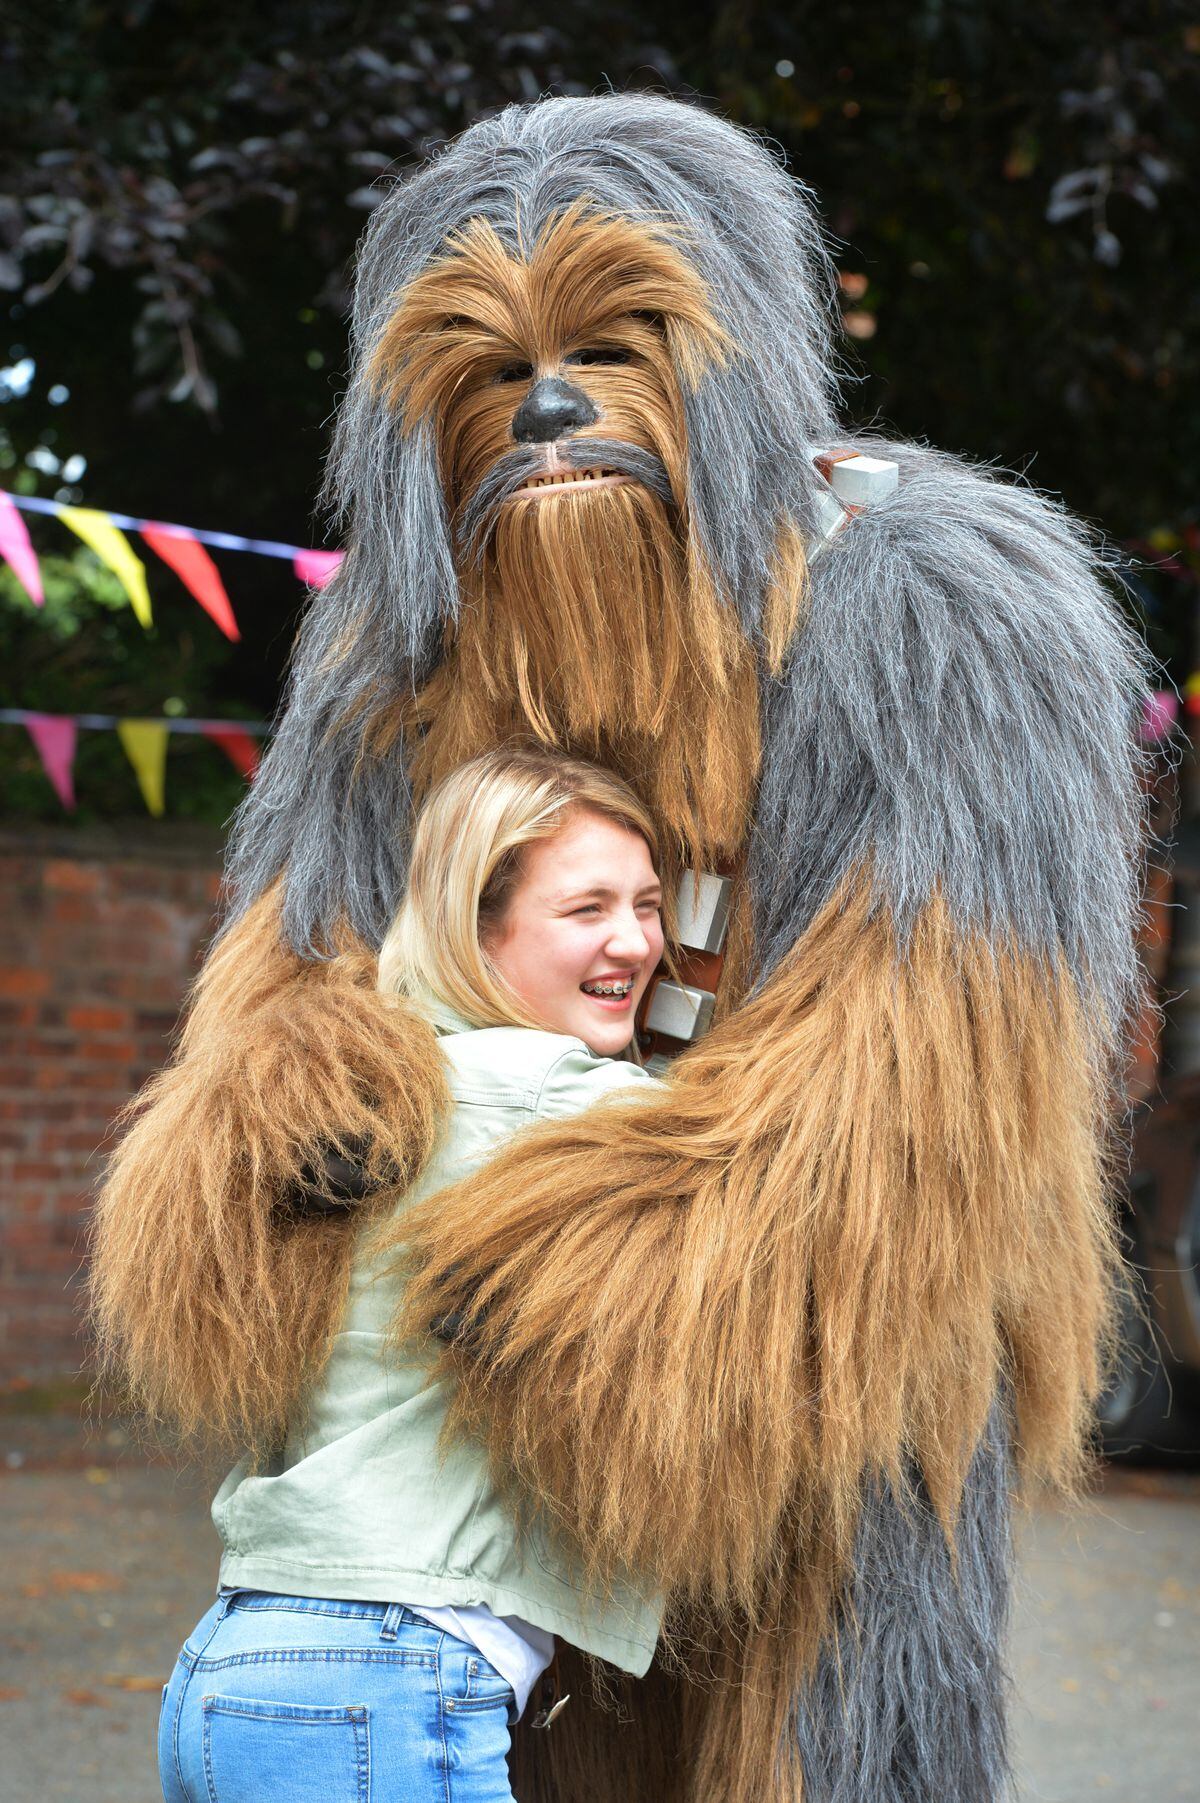 The 15-year-old has been able to get out and enjoy events as the guest of honour, as well as meeting stars such as Chewbacca